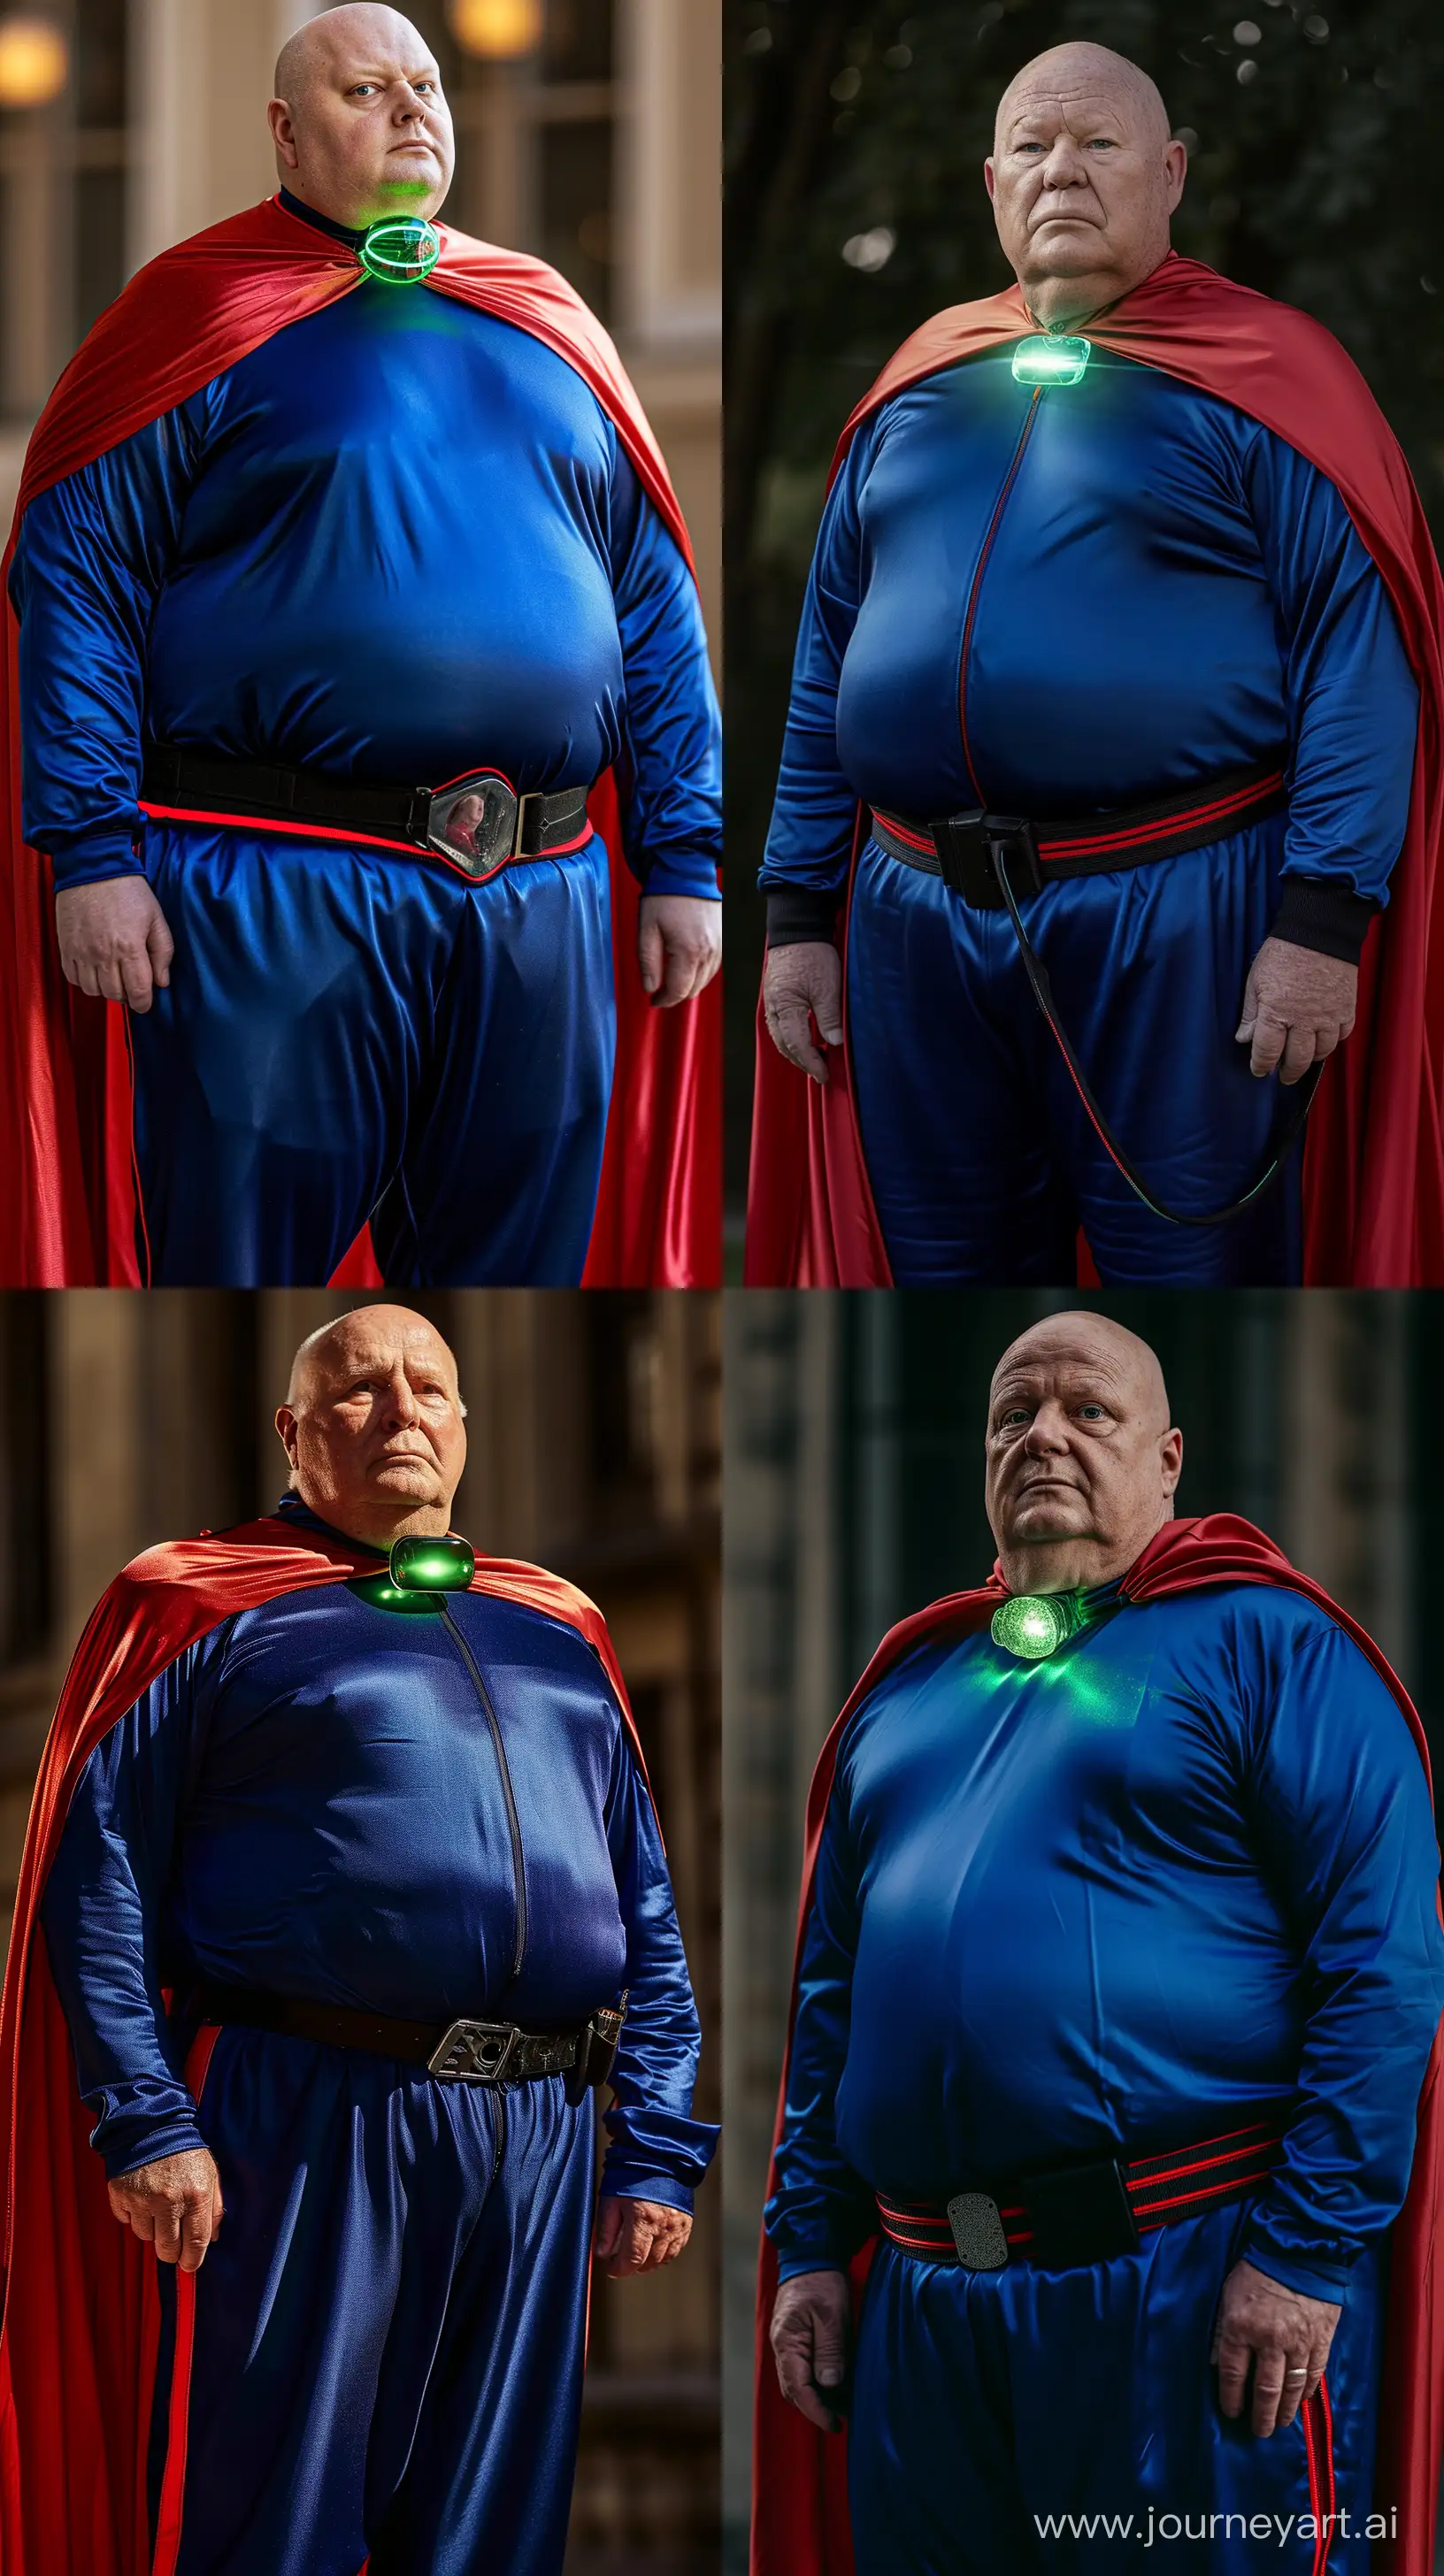 Elderly-Superhero-in-Royal-Blue-Tracksuit-with-Red-Cape